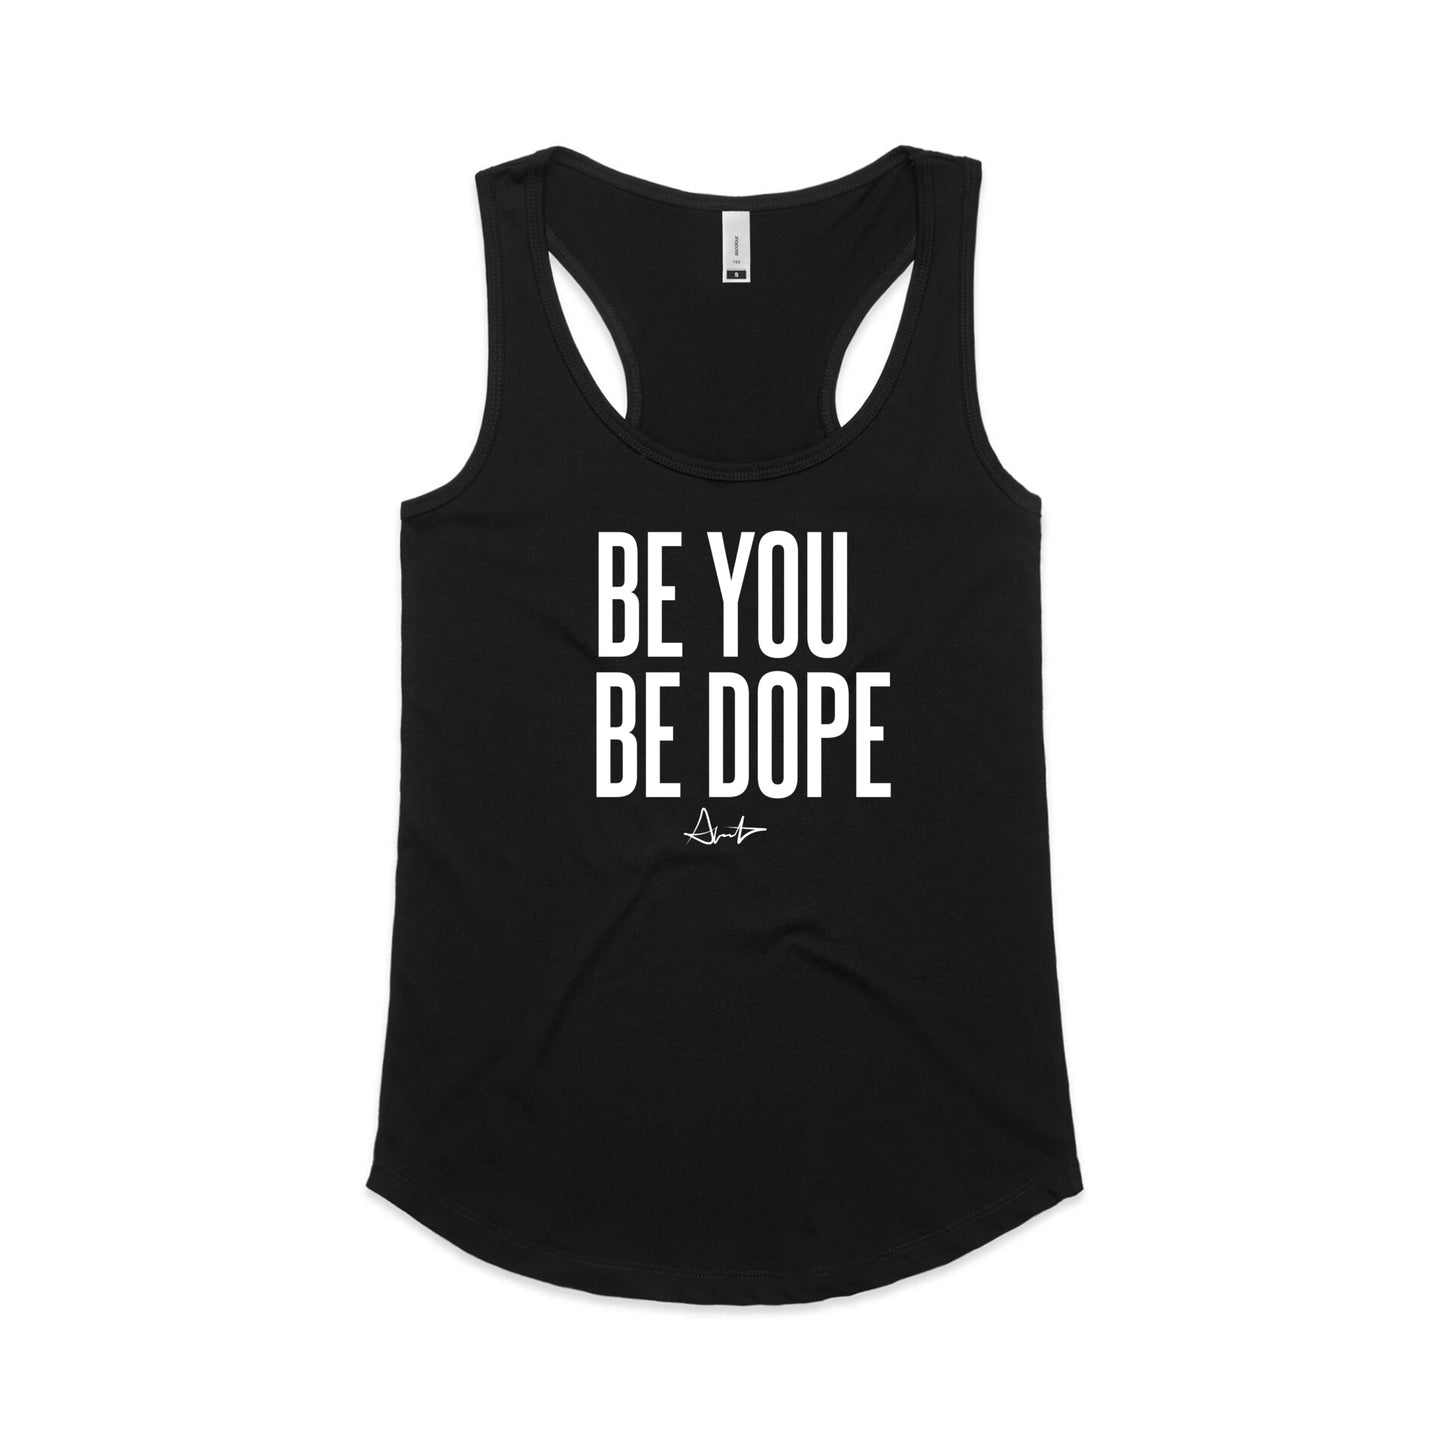 Be you Be dope Women's tank top